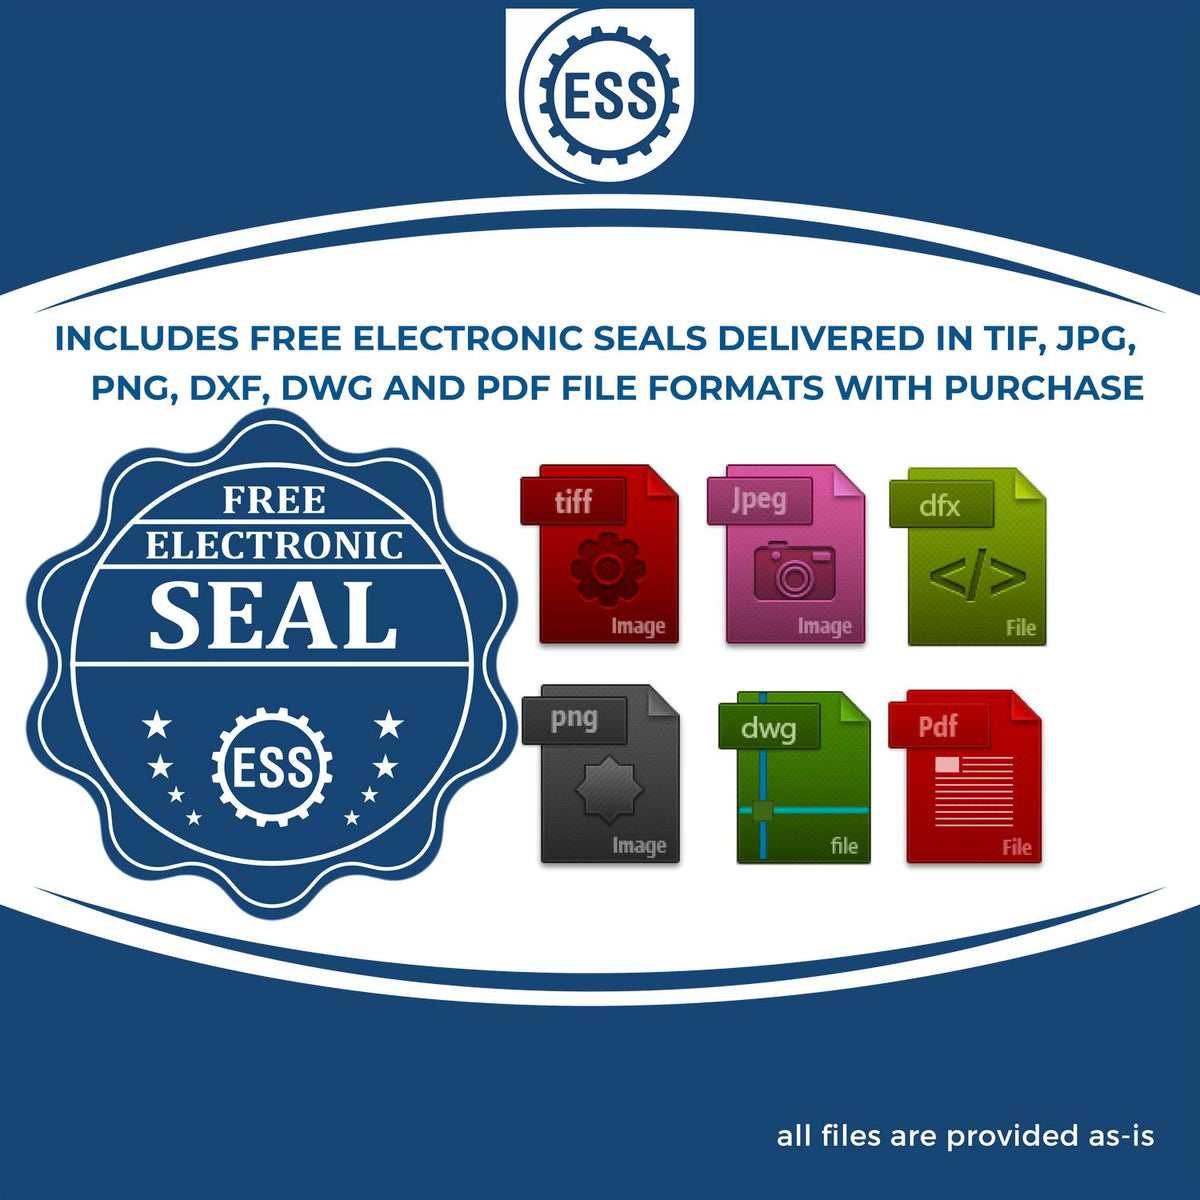 An infographic for the free electronic seal for the Handheld Michigan Land Surveyor Seal illustrating the different file type icons such as DXF, DWG, TIF, JPG and PNG.